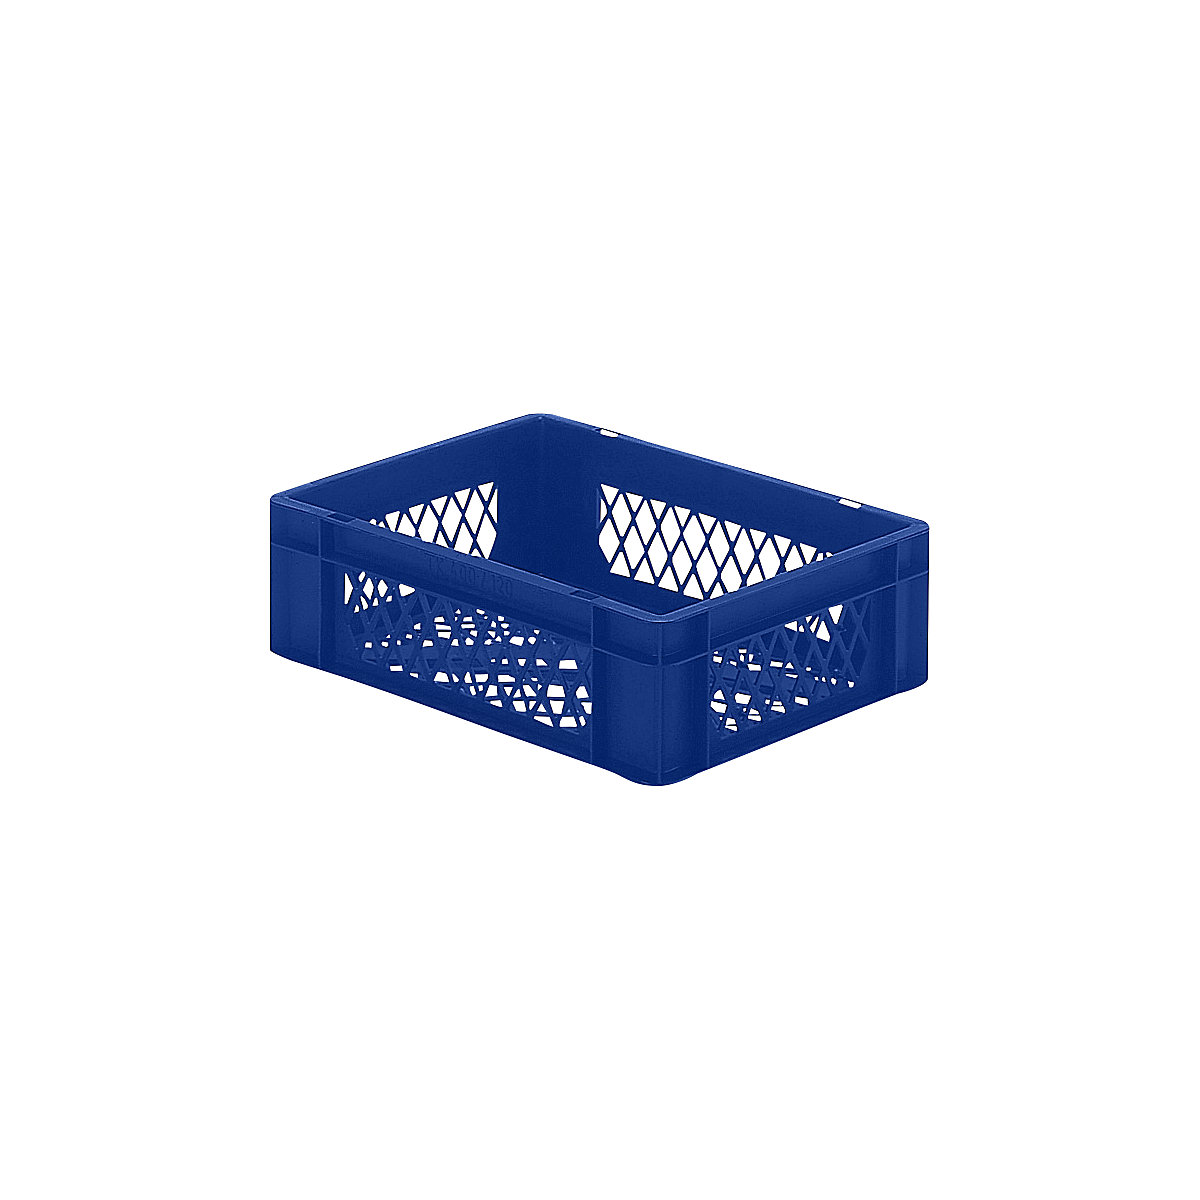 Euro stacking container, perforated walls and base, LxWxH 400 x 300 x 120 mm, blue, pack of 5